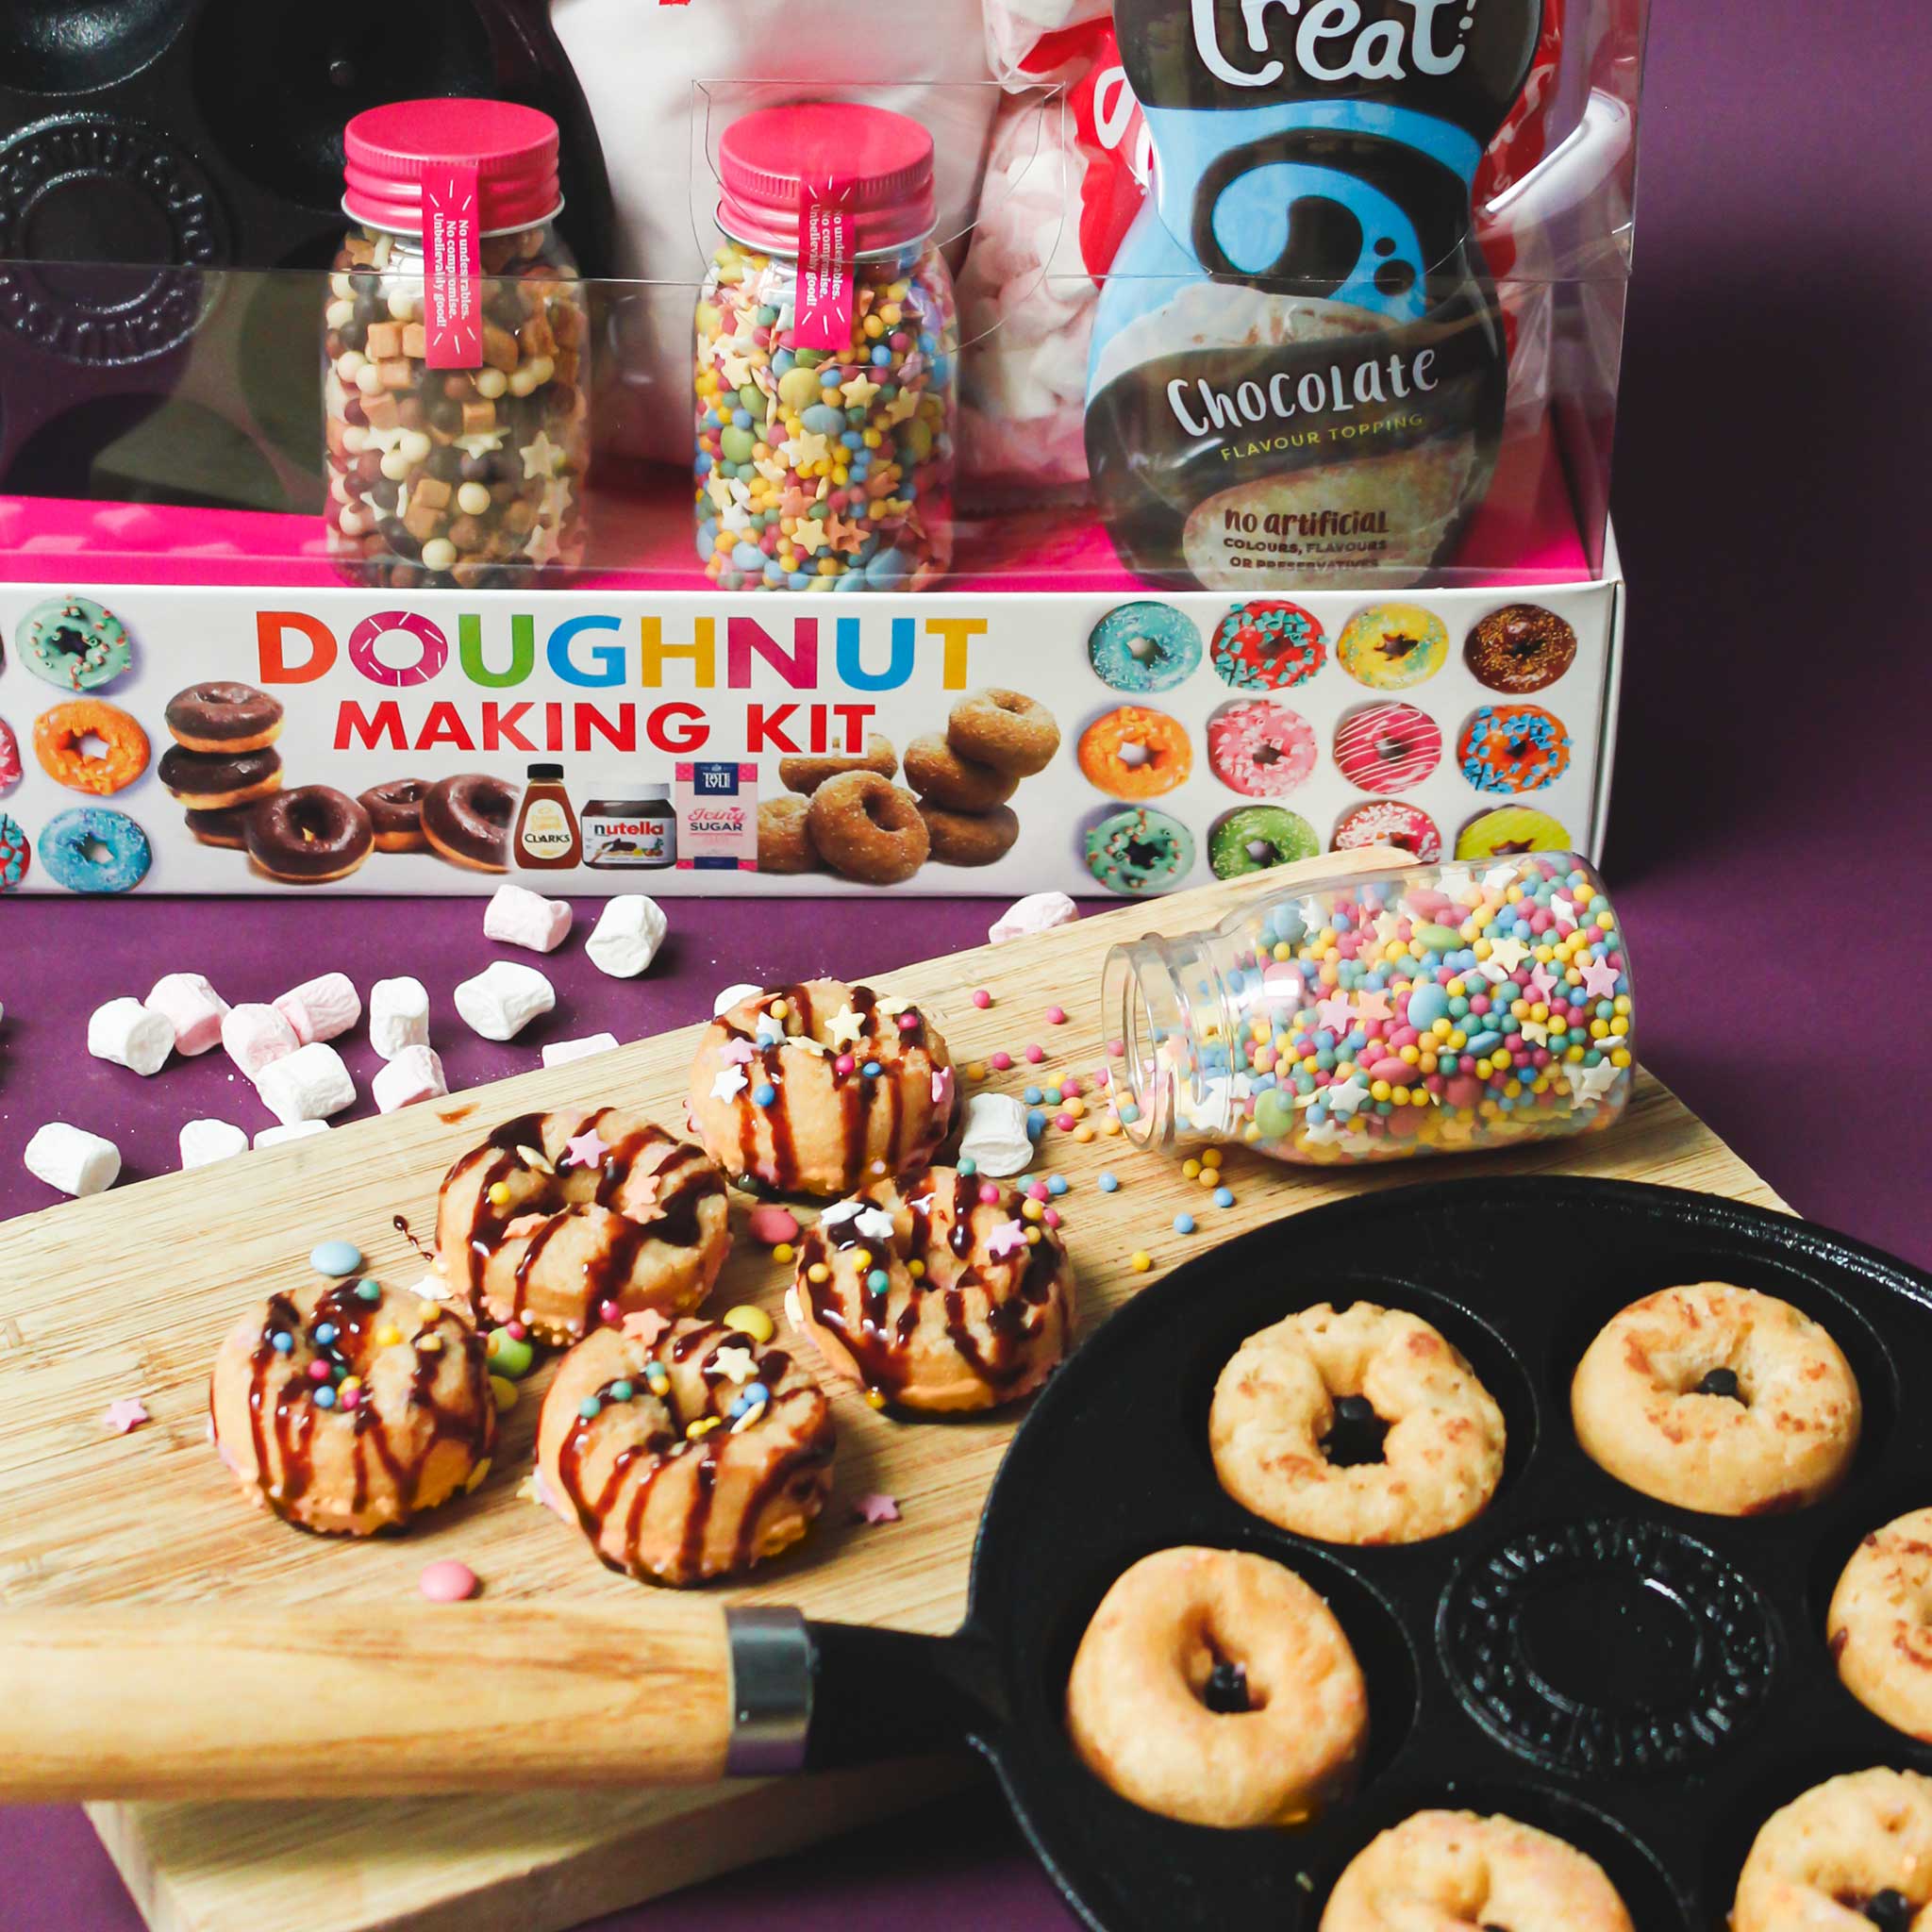 Doughnut making kit in clear packaging showing contents from China Blue